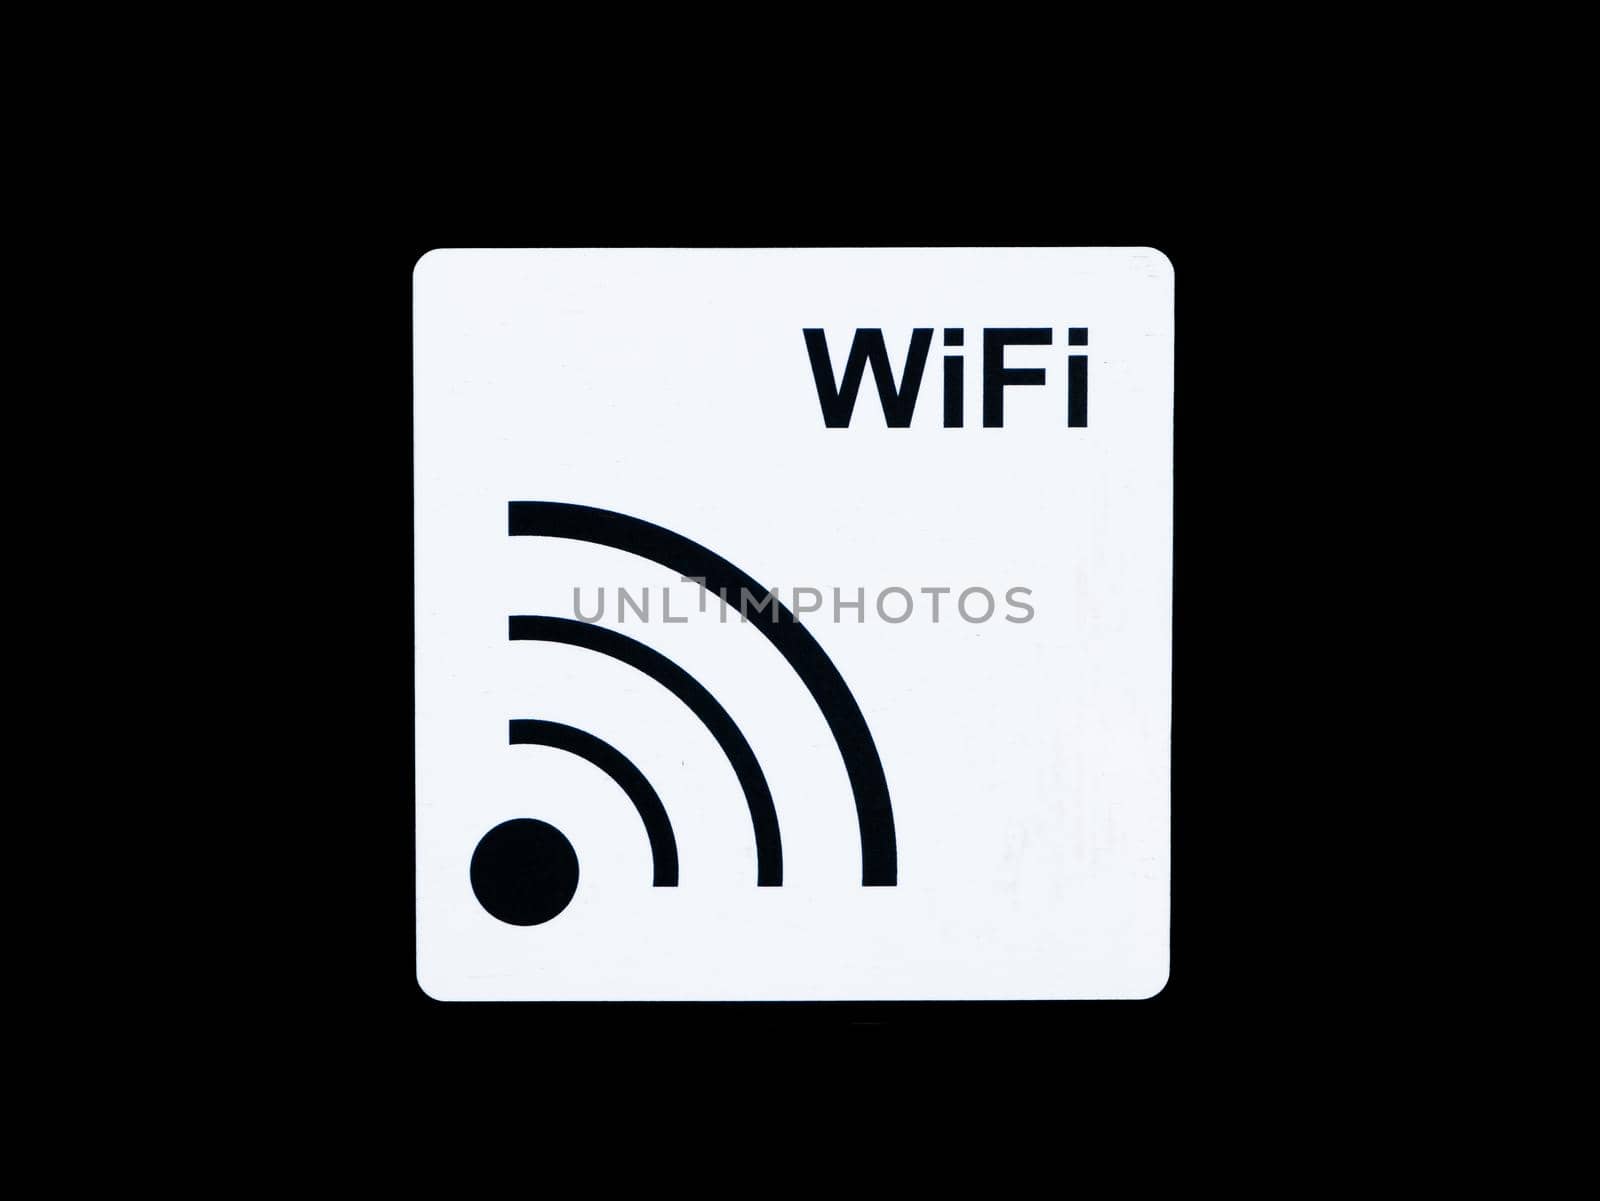 Wifi white square sign on dark background and text wifi